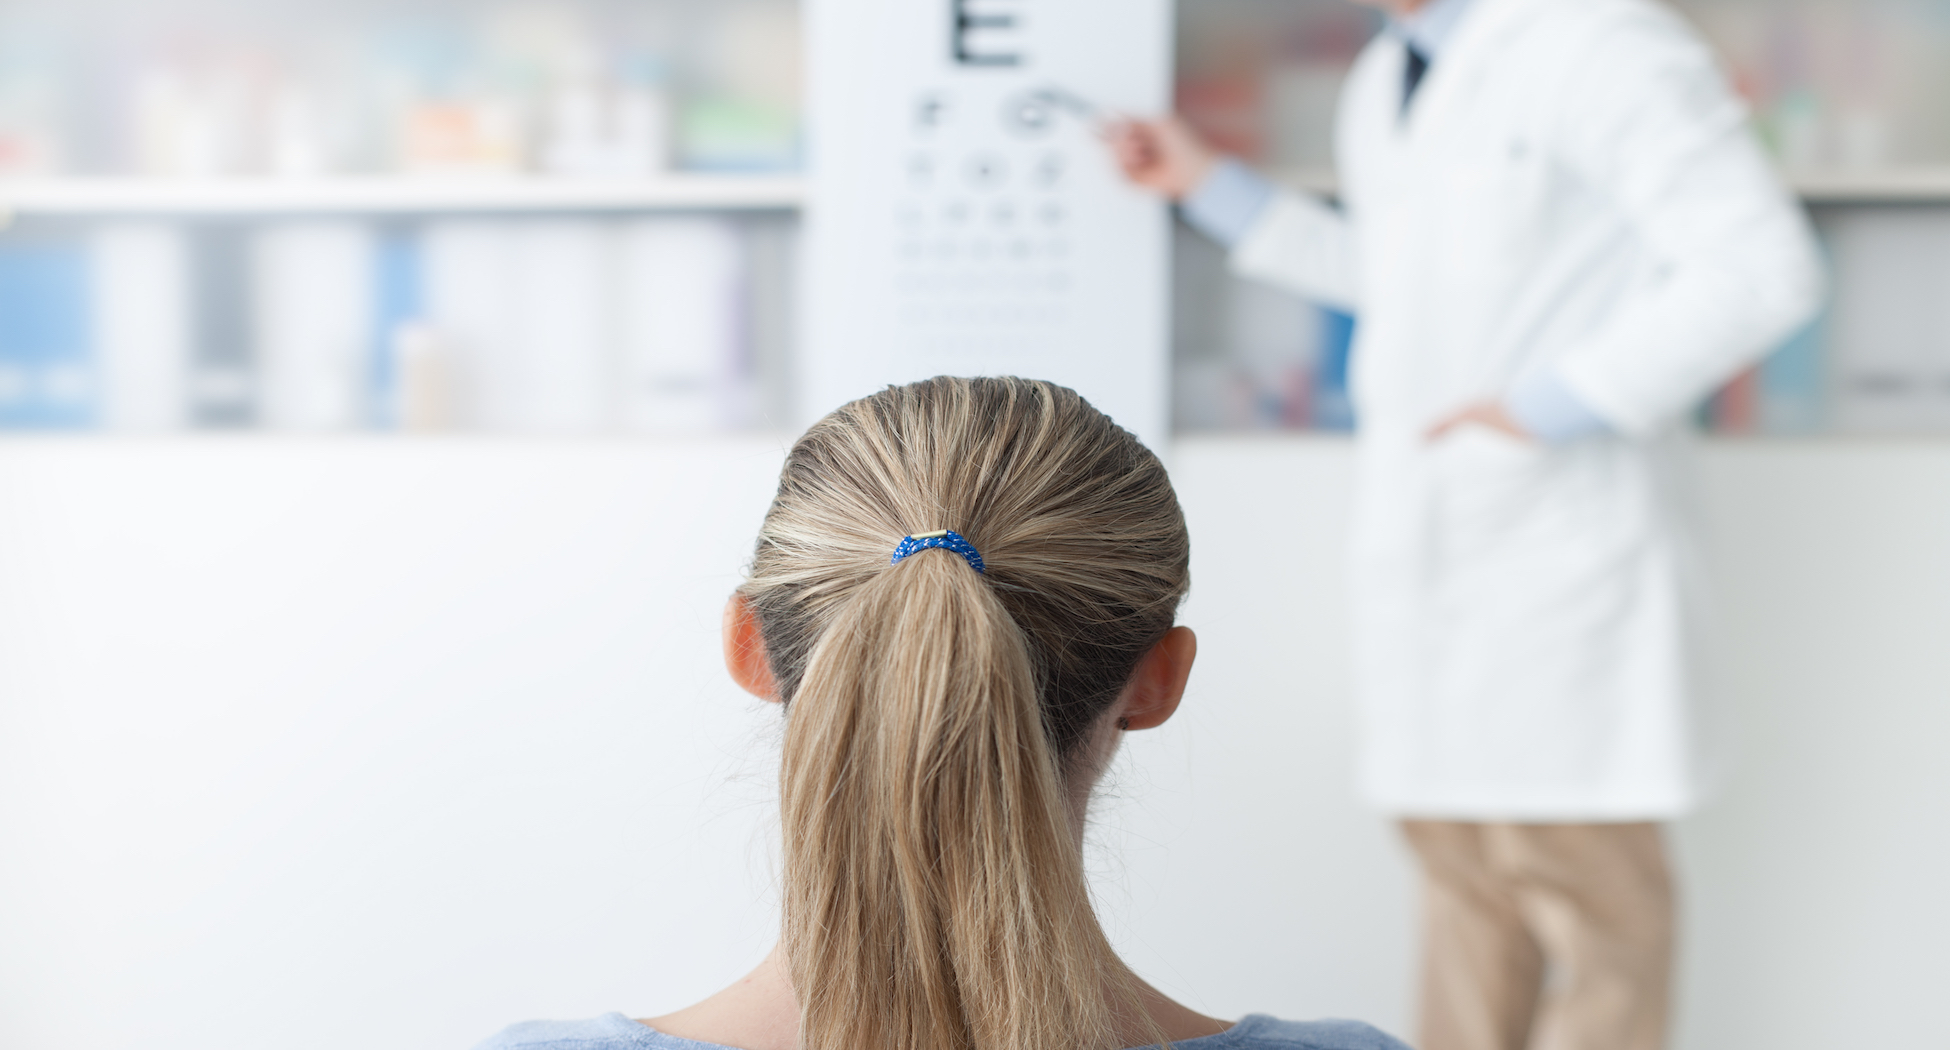 5 Signs You Should Have an Eye Exam